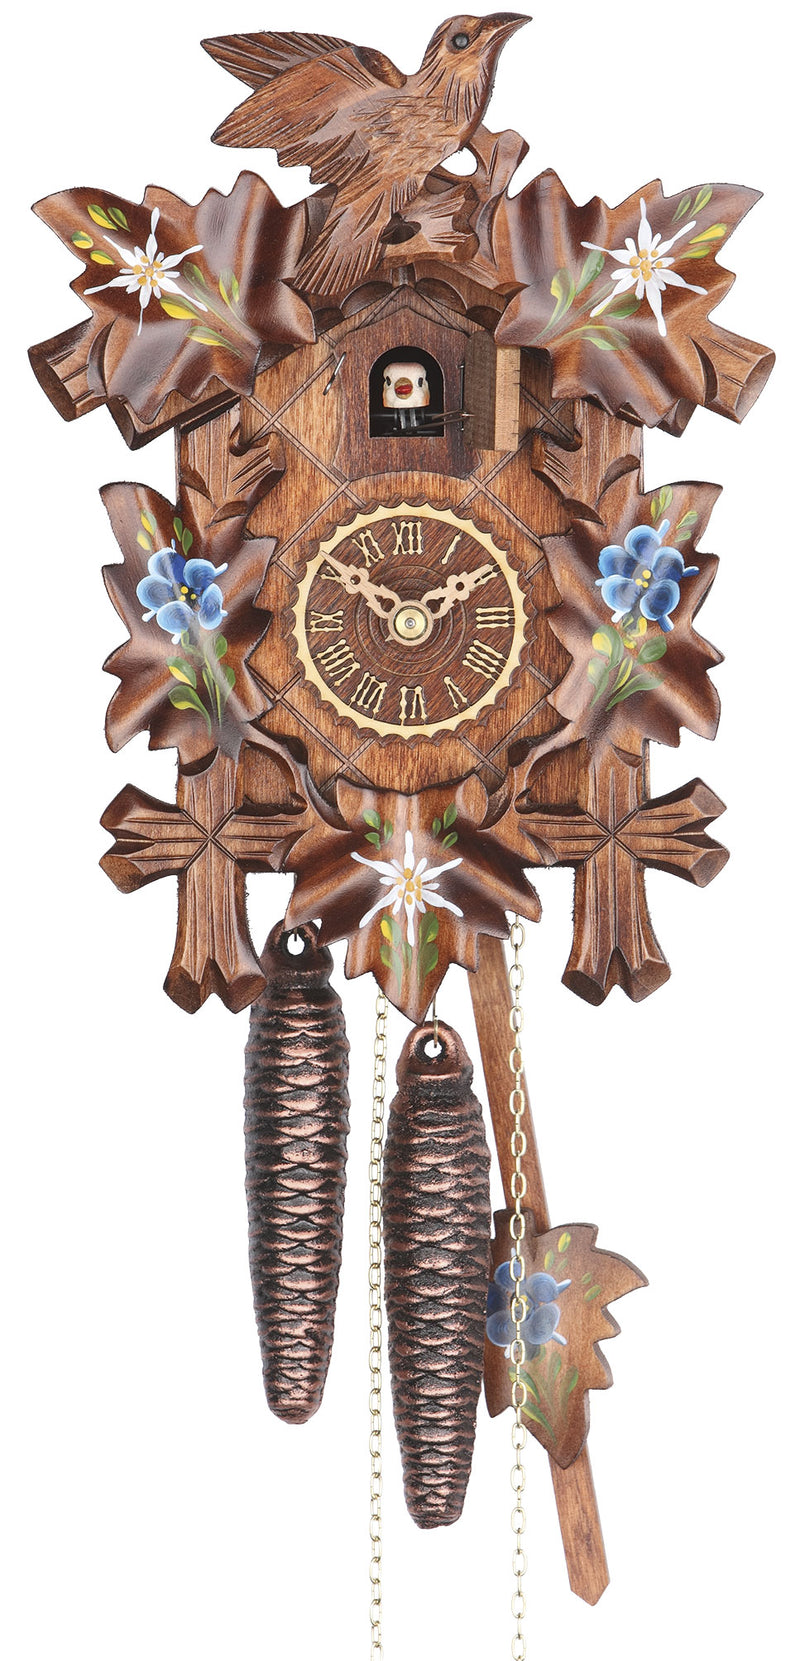 KU1100enz - 1 Day Five Leaf Cuckoo Clock with Hand Painted Flowers